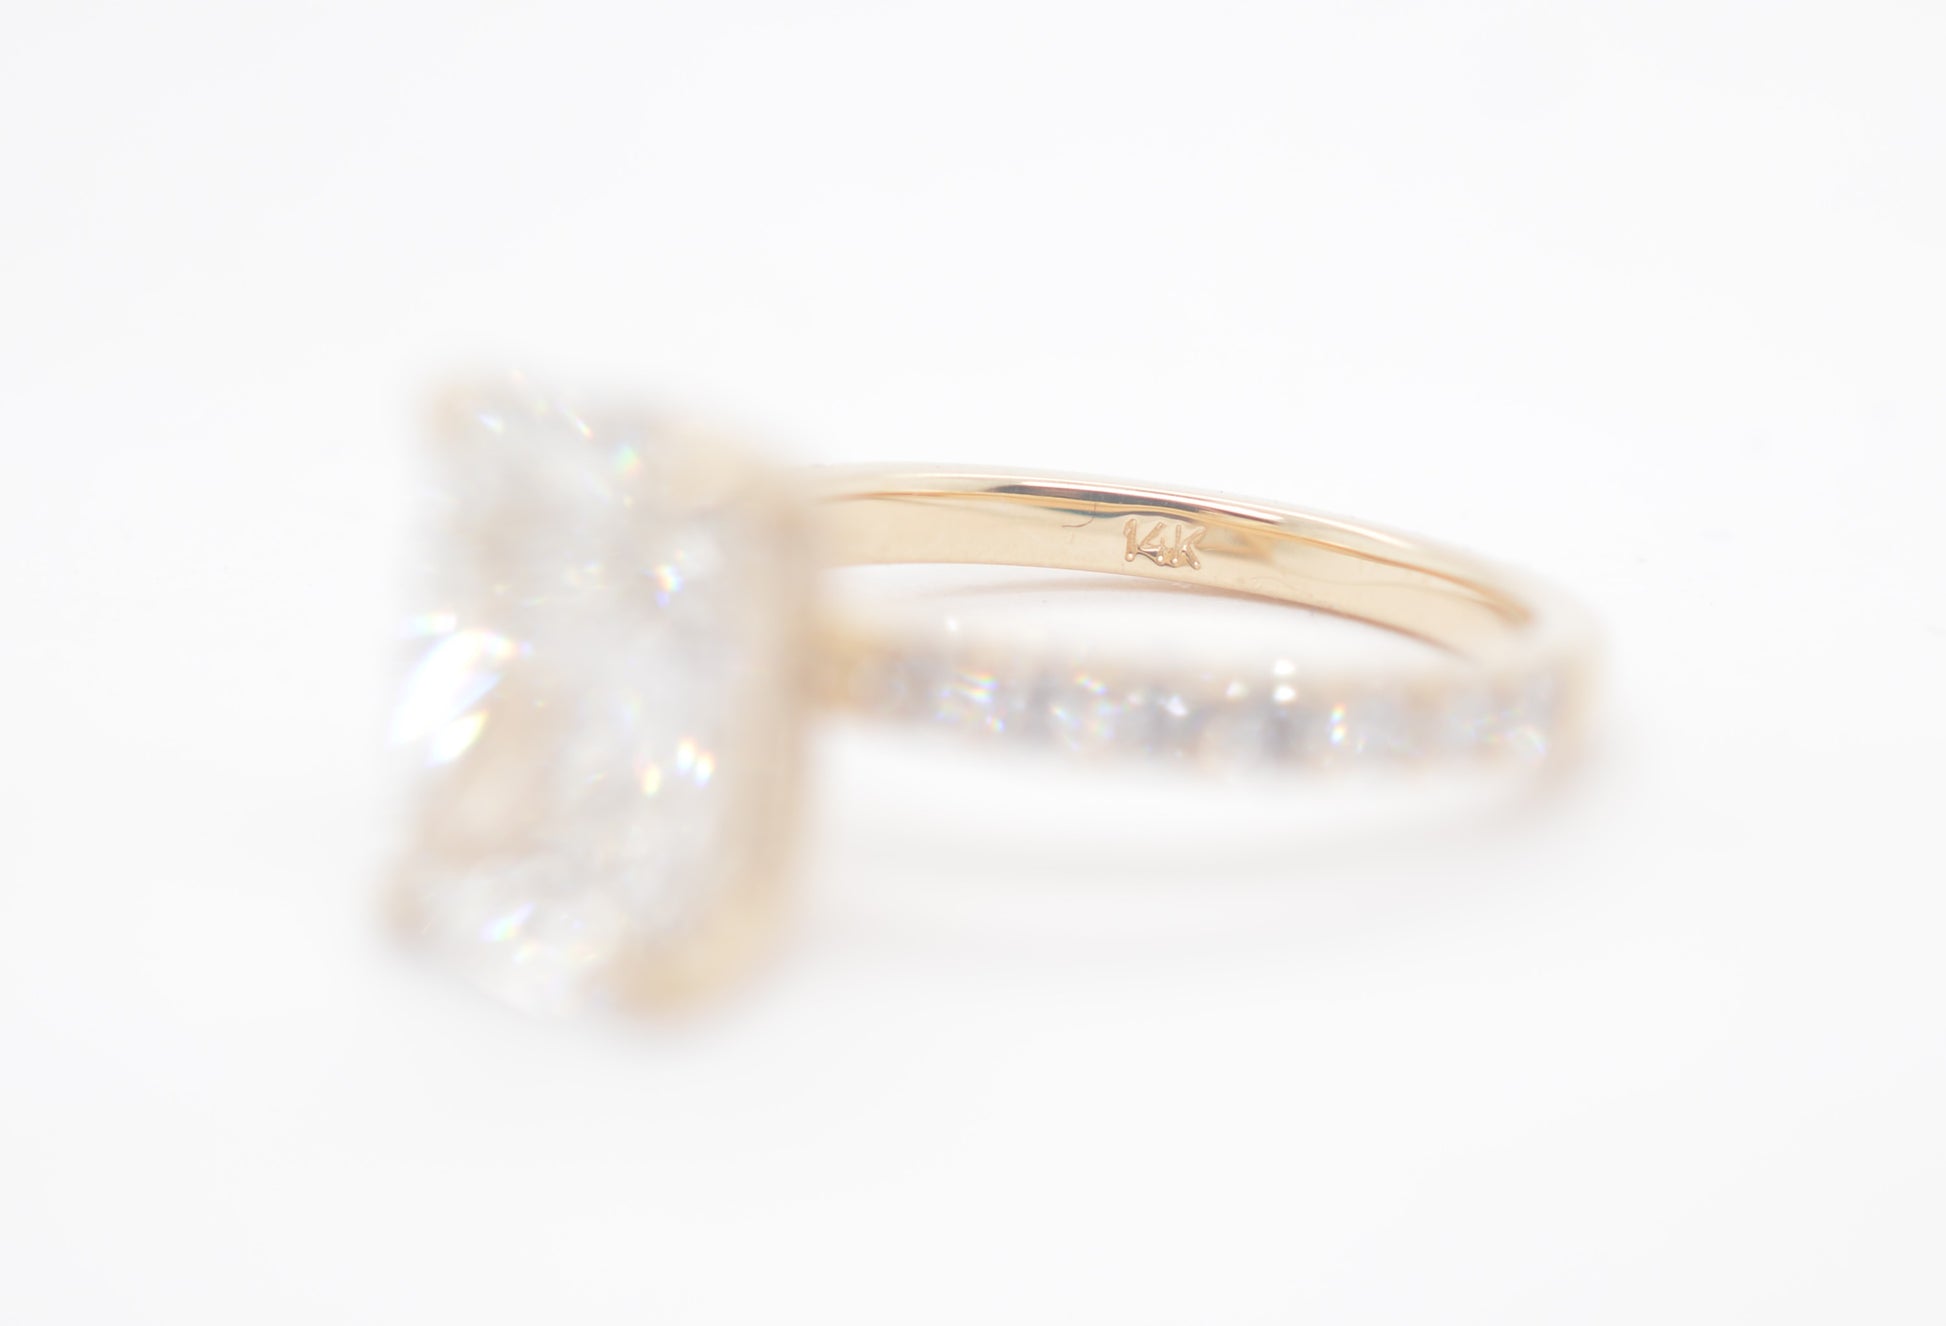 Made To Order 4ct Cushion Cut Lab Diamond Engagement Ring 14K Yellow Gold Made to Order